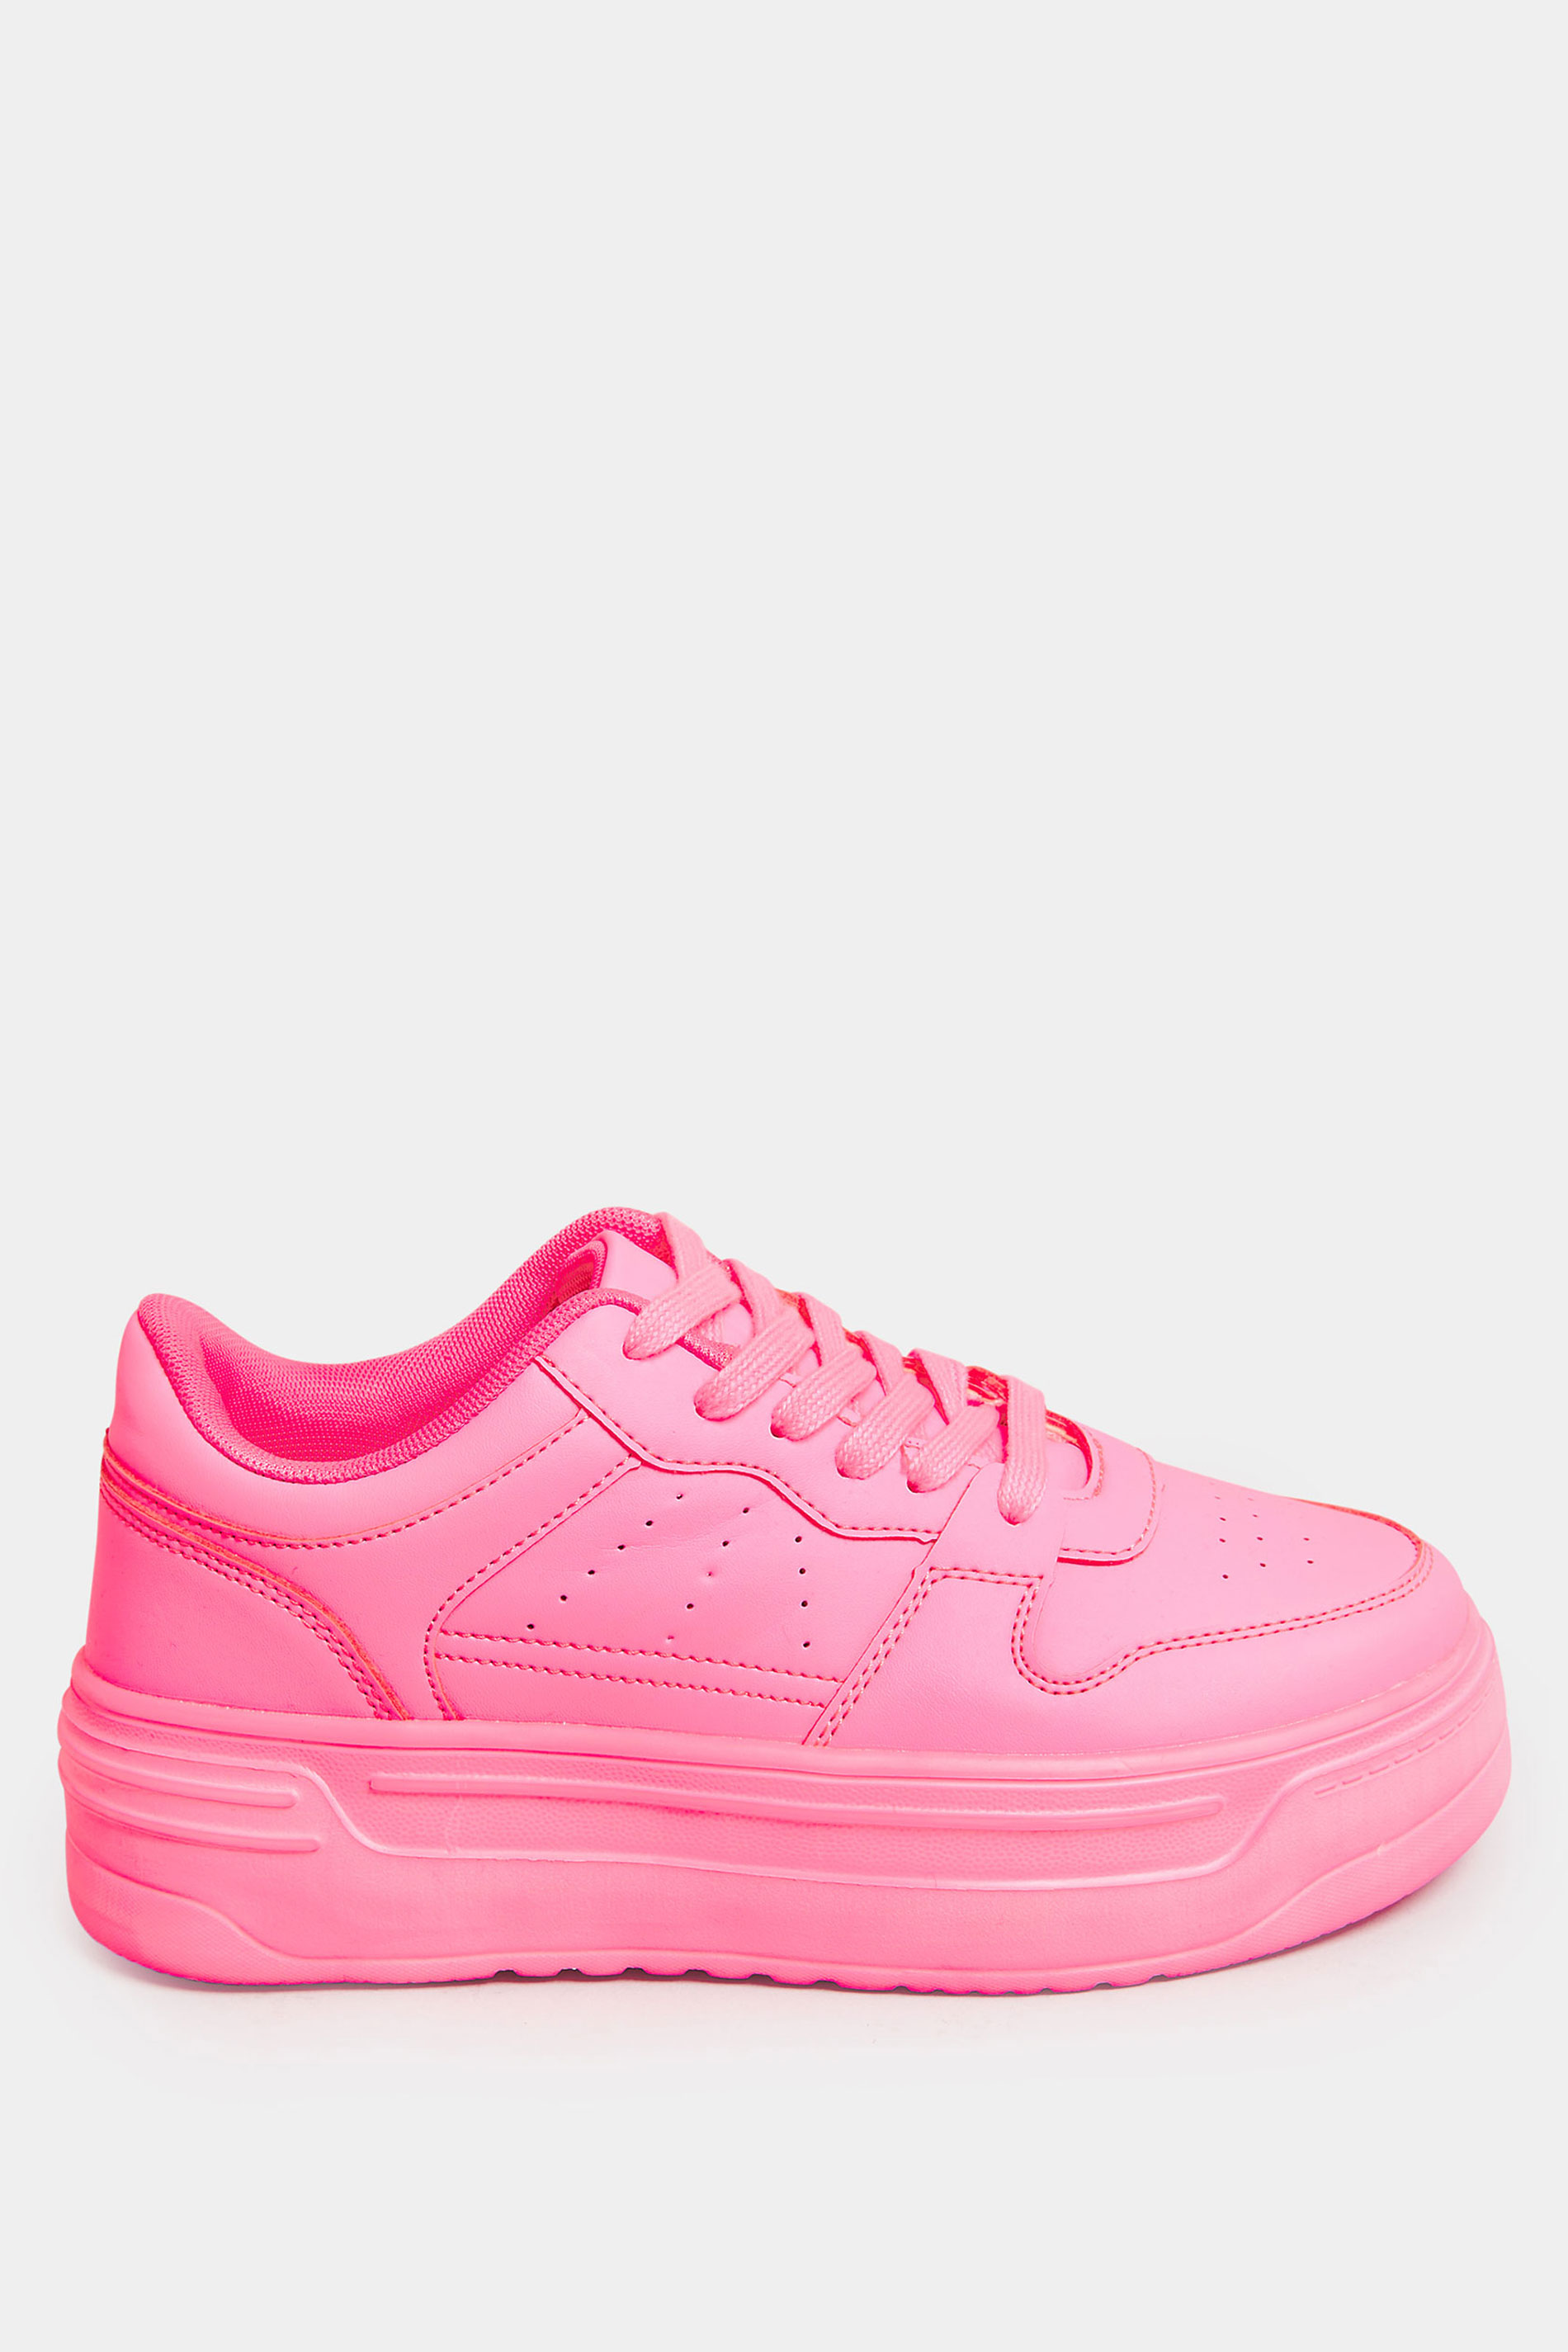 Neon Pink Chunky Trainers In Extra Wide EEE Fit | Yours Clothing